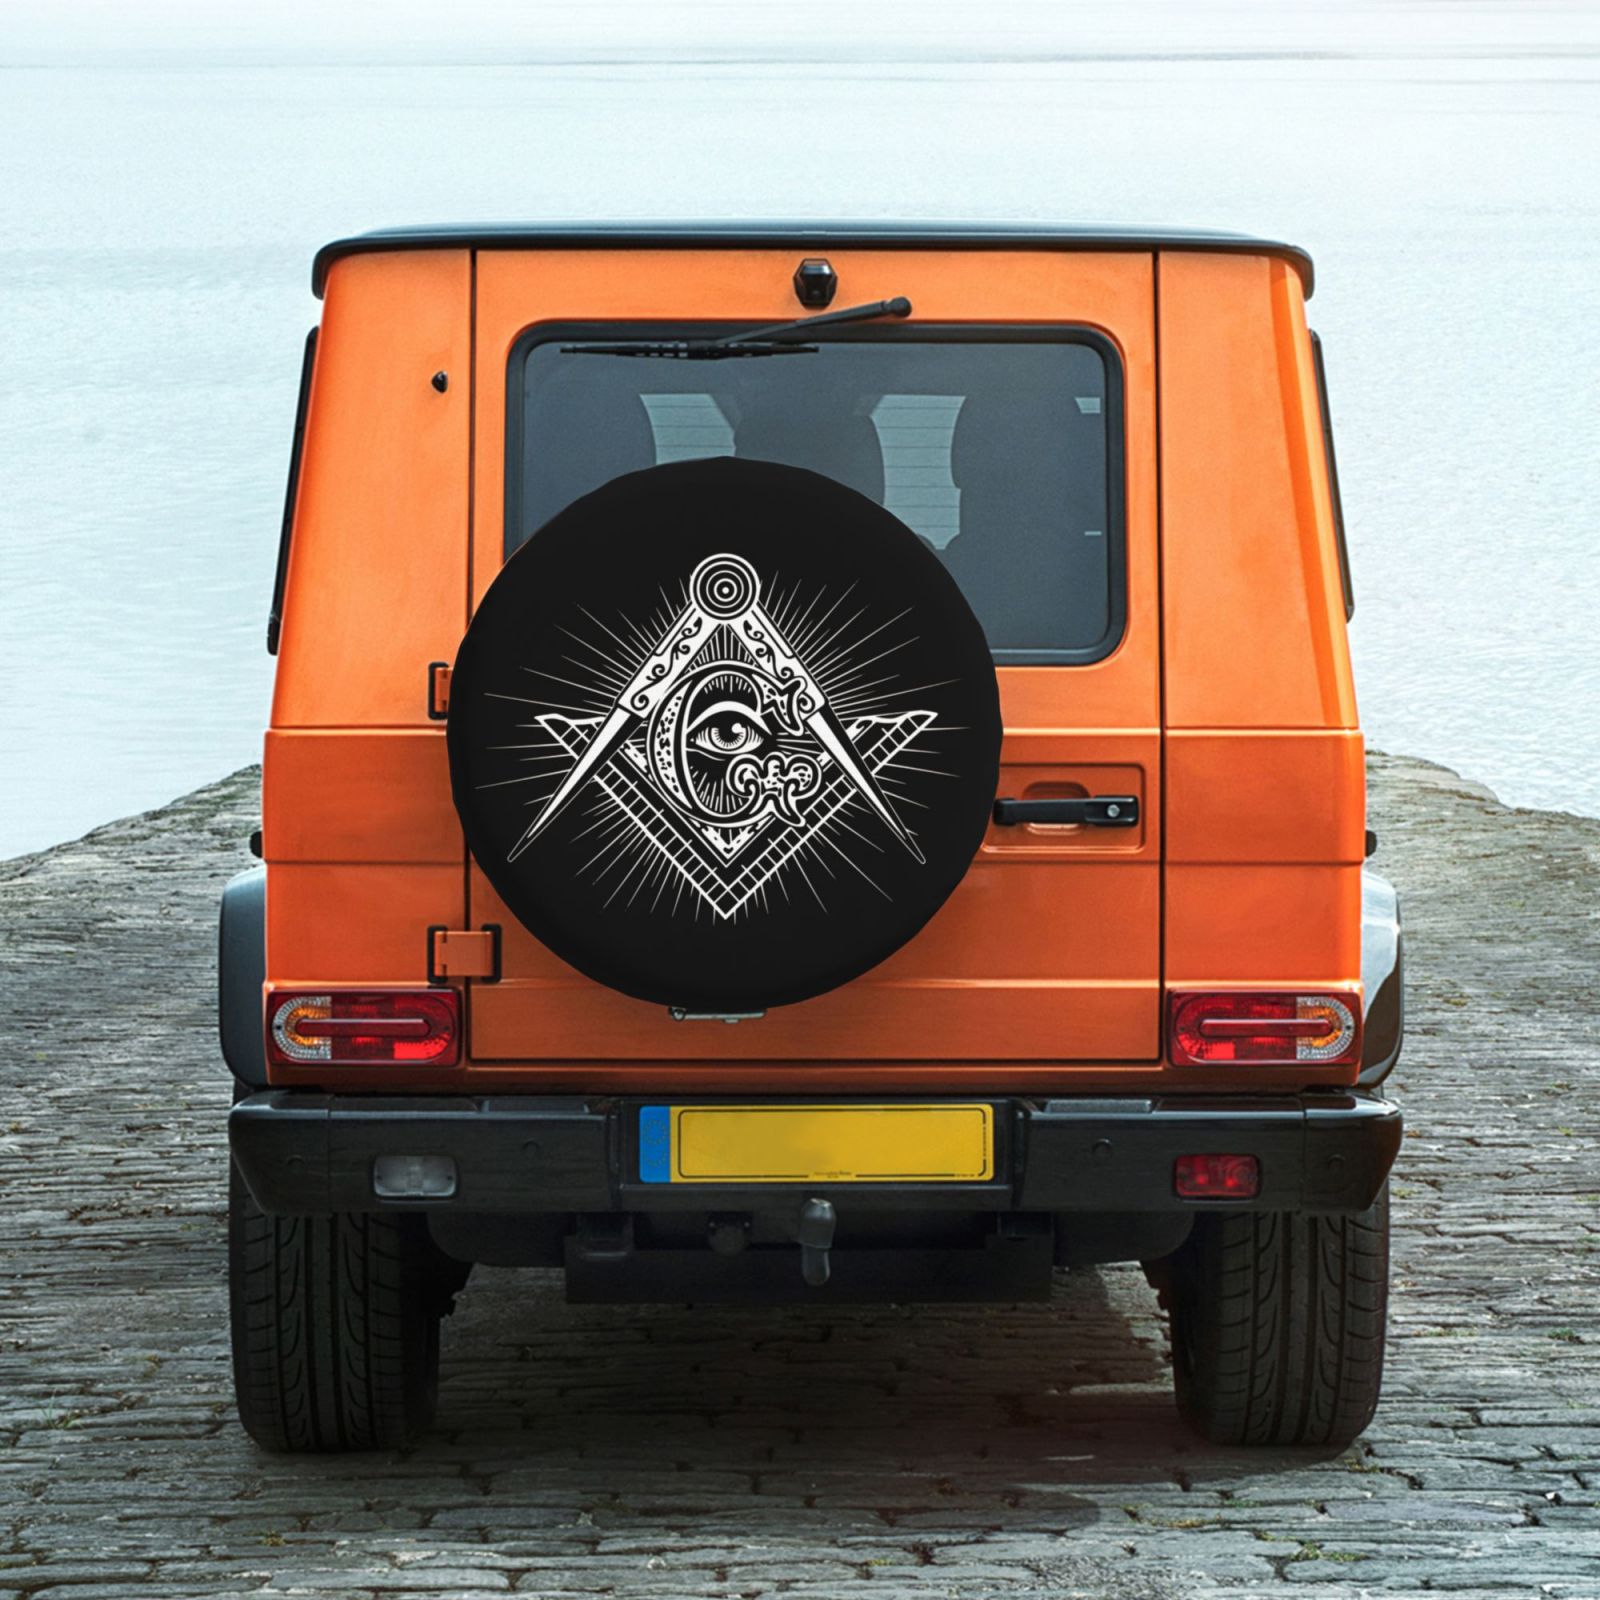 DouZhe Waterproof Spare Tire Cover, Mason Masonic Brothers Prints  Adjustable Wheel Covers Fit for Jeep Trailer RV SUV Car, 16 inch 